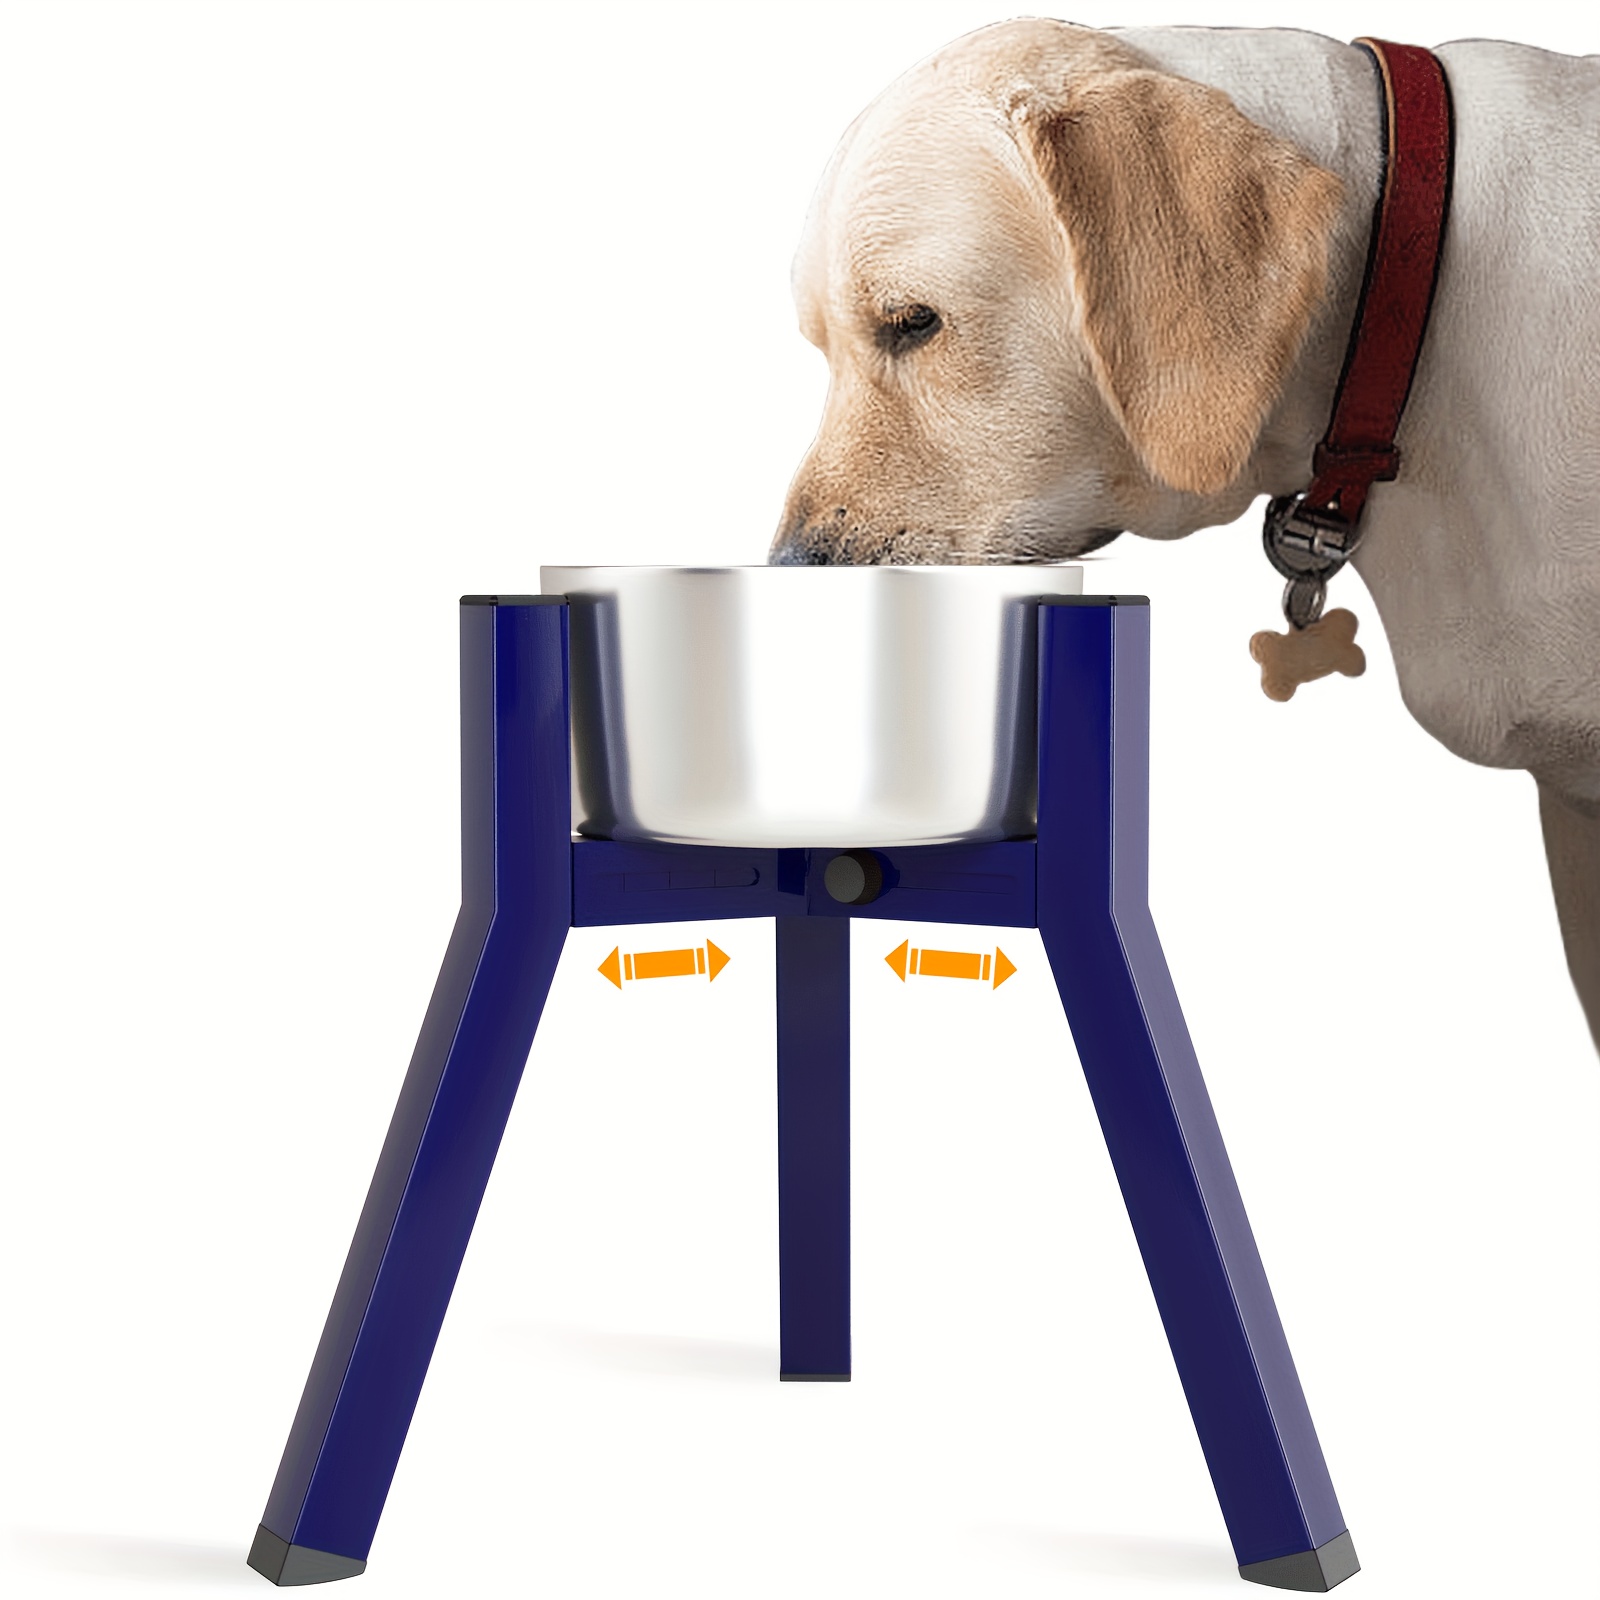 

Adjustable Blue Metal Dog Bowl Stand For Large Breeds - 11" Height, Fits 7-10.6" Bowls, Elevated Feeder For Food & Water (bowl Not Included)